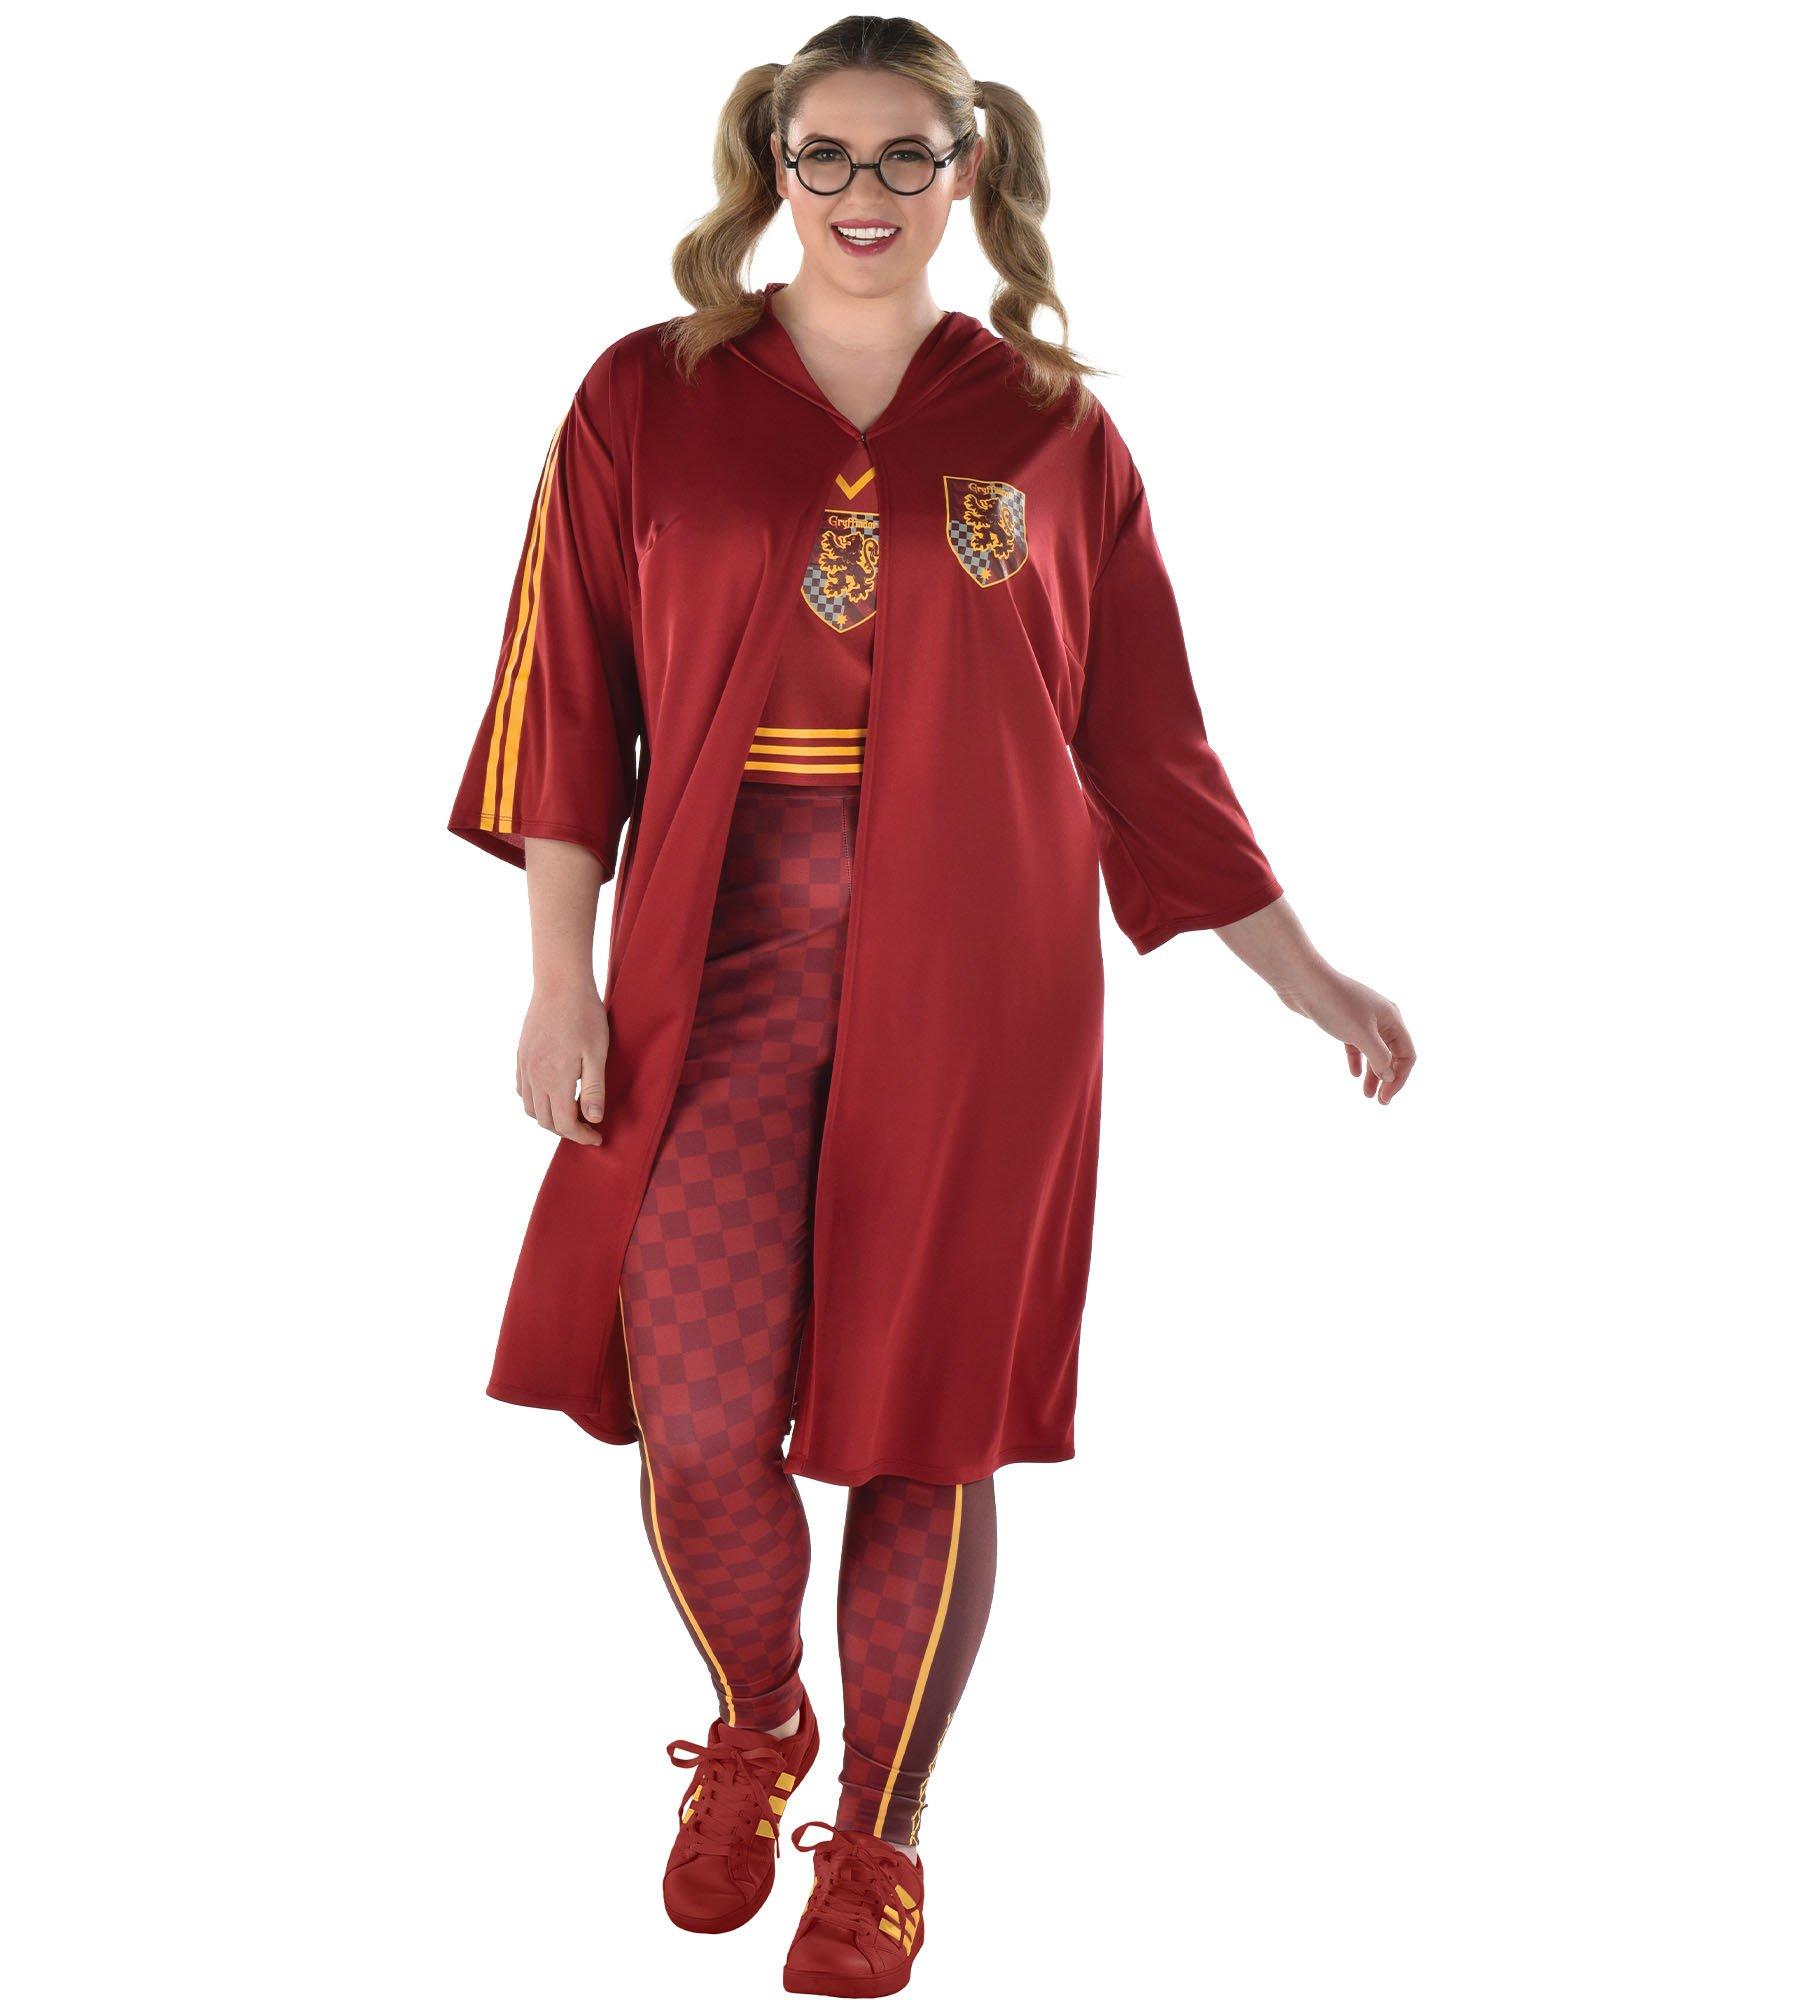 Adult Gryffindor Quidditch Plus Size Costume - Harry Potter